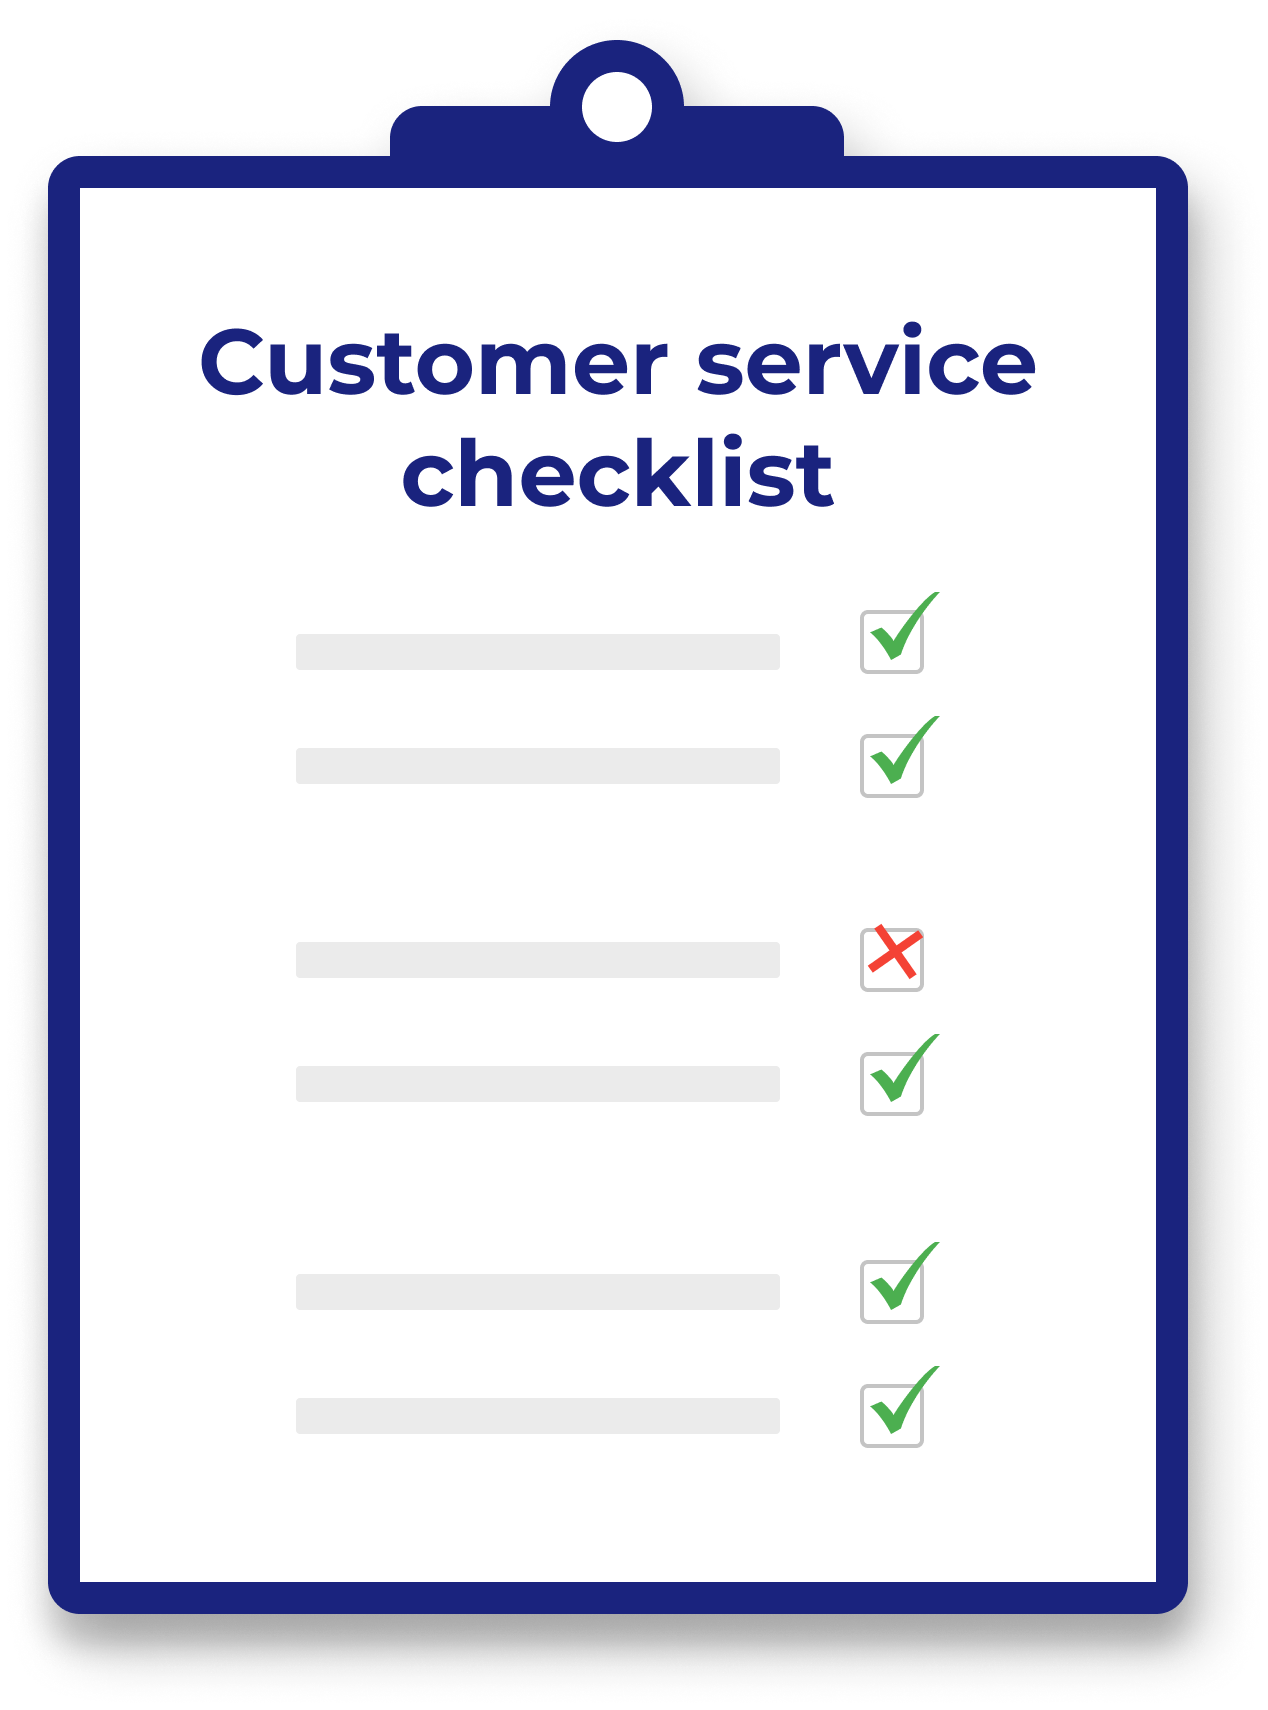 customer service checklist - 6 Common Restaurant Problems and How to Solve Them